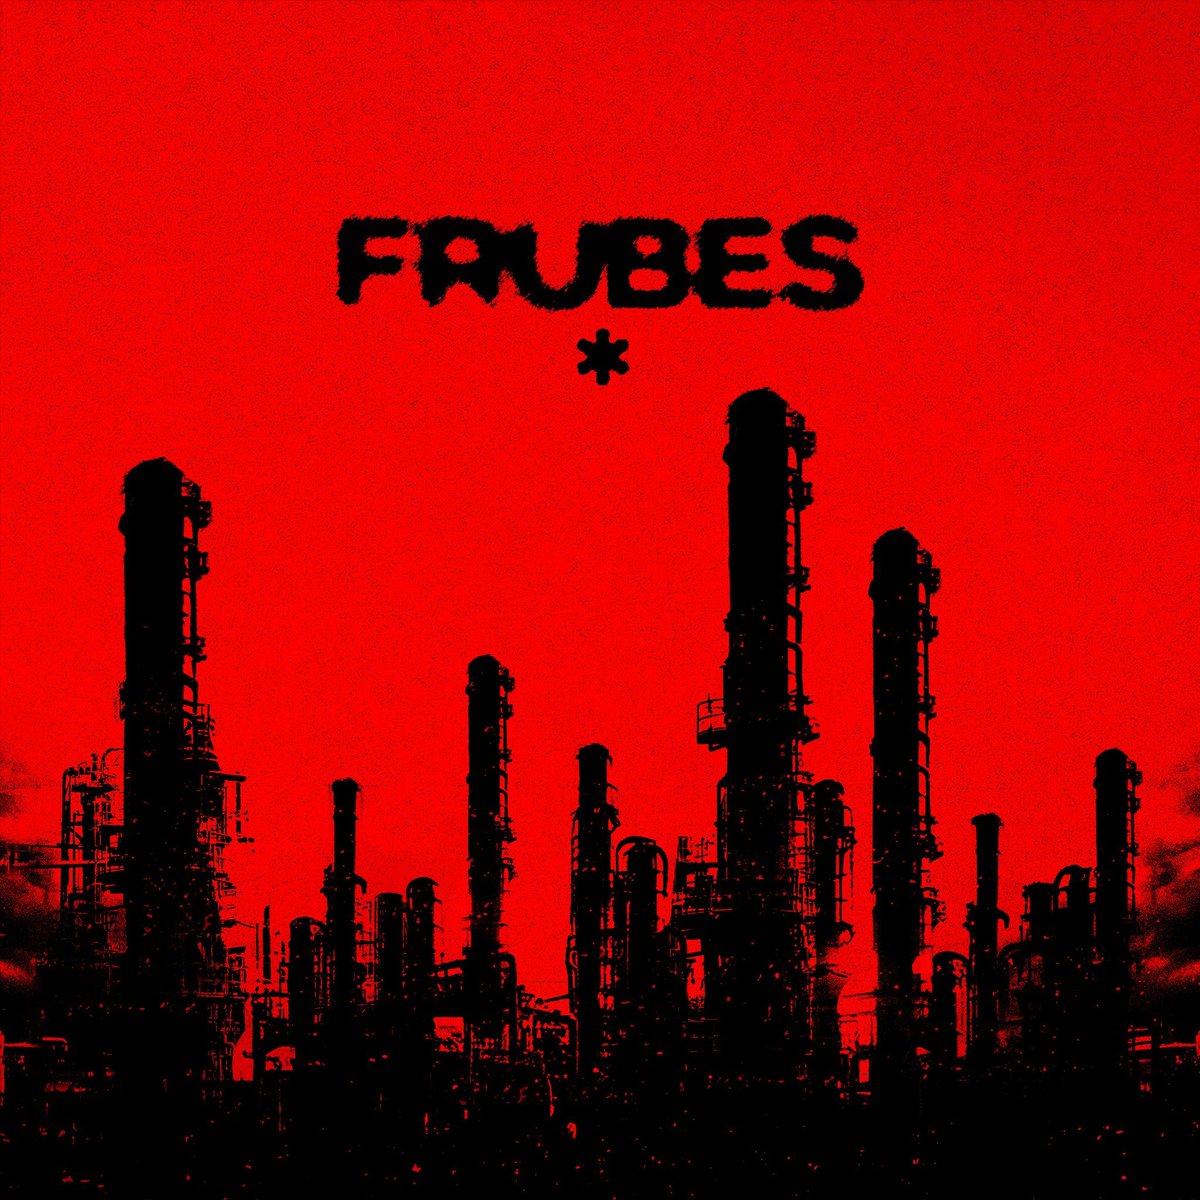 FRUUUUUUBES 

with stvg, out thurs ⛽️⛽️